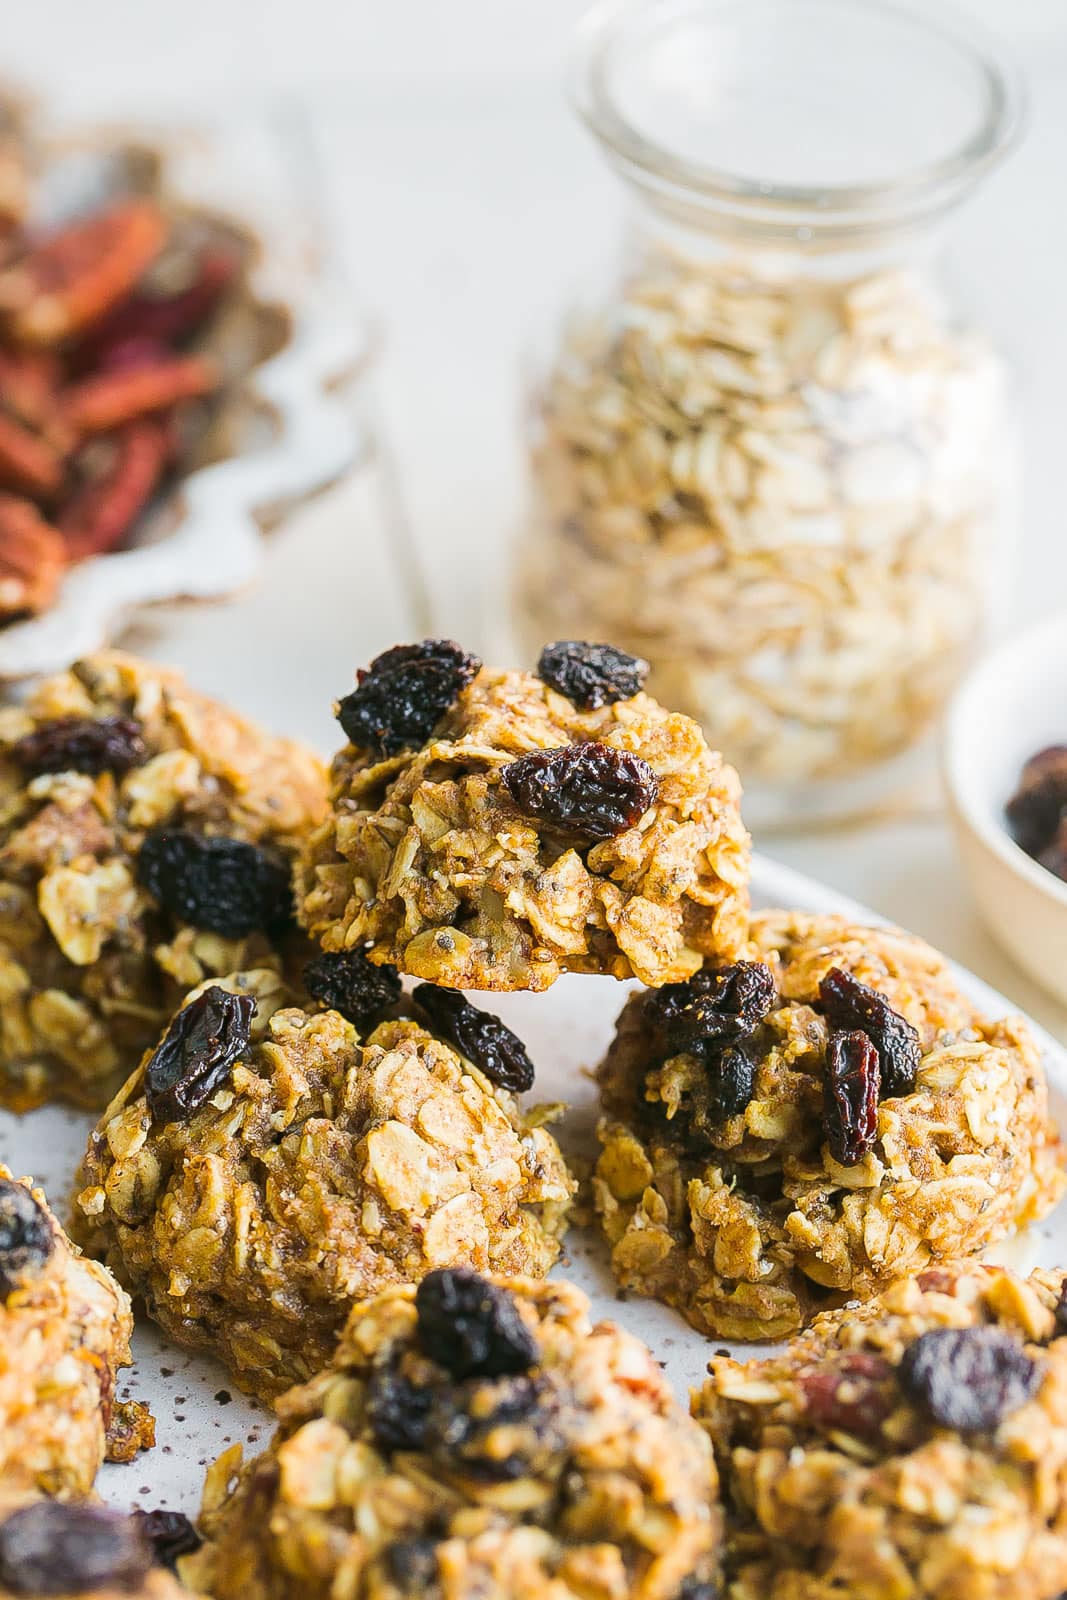 Oatmeal cookies with raisins on top.